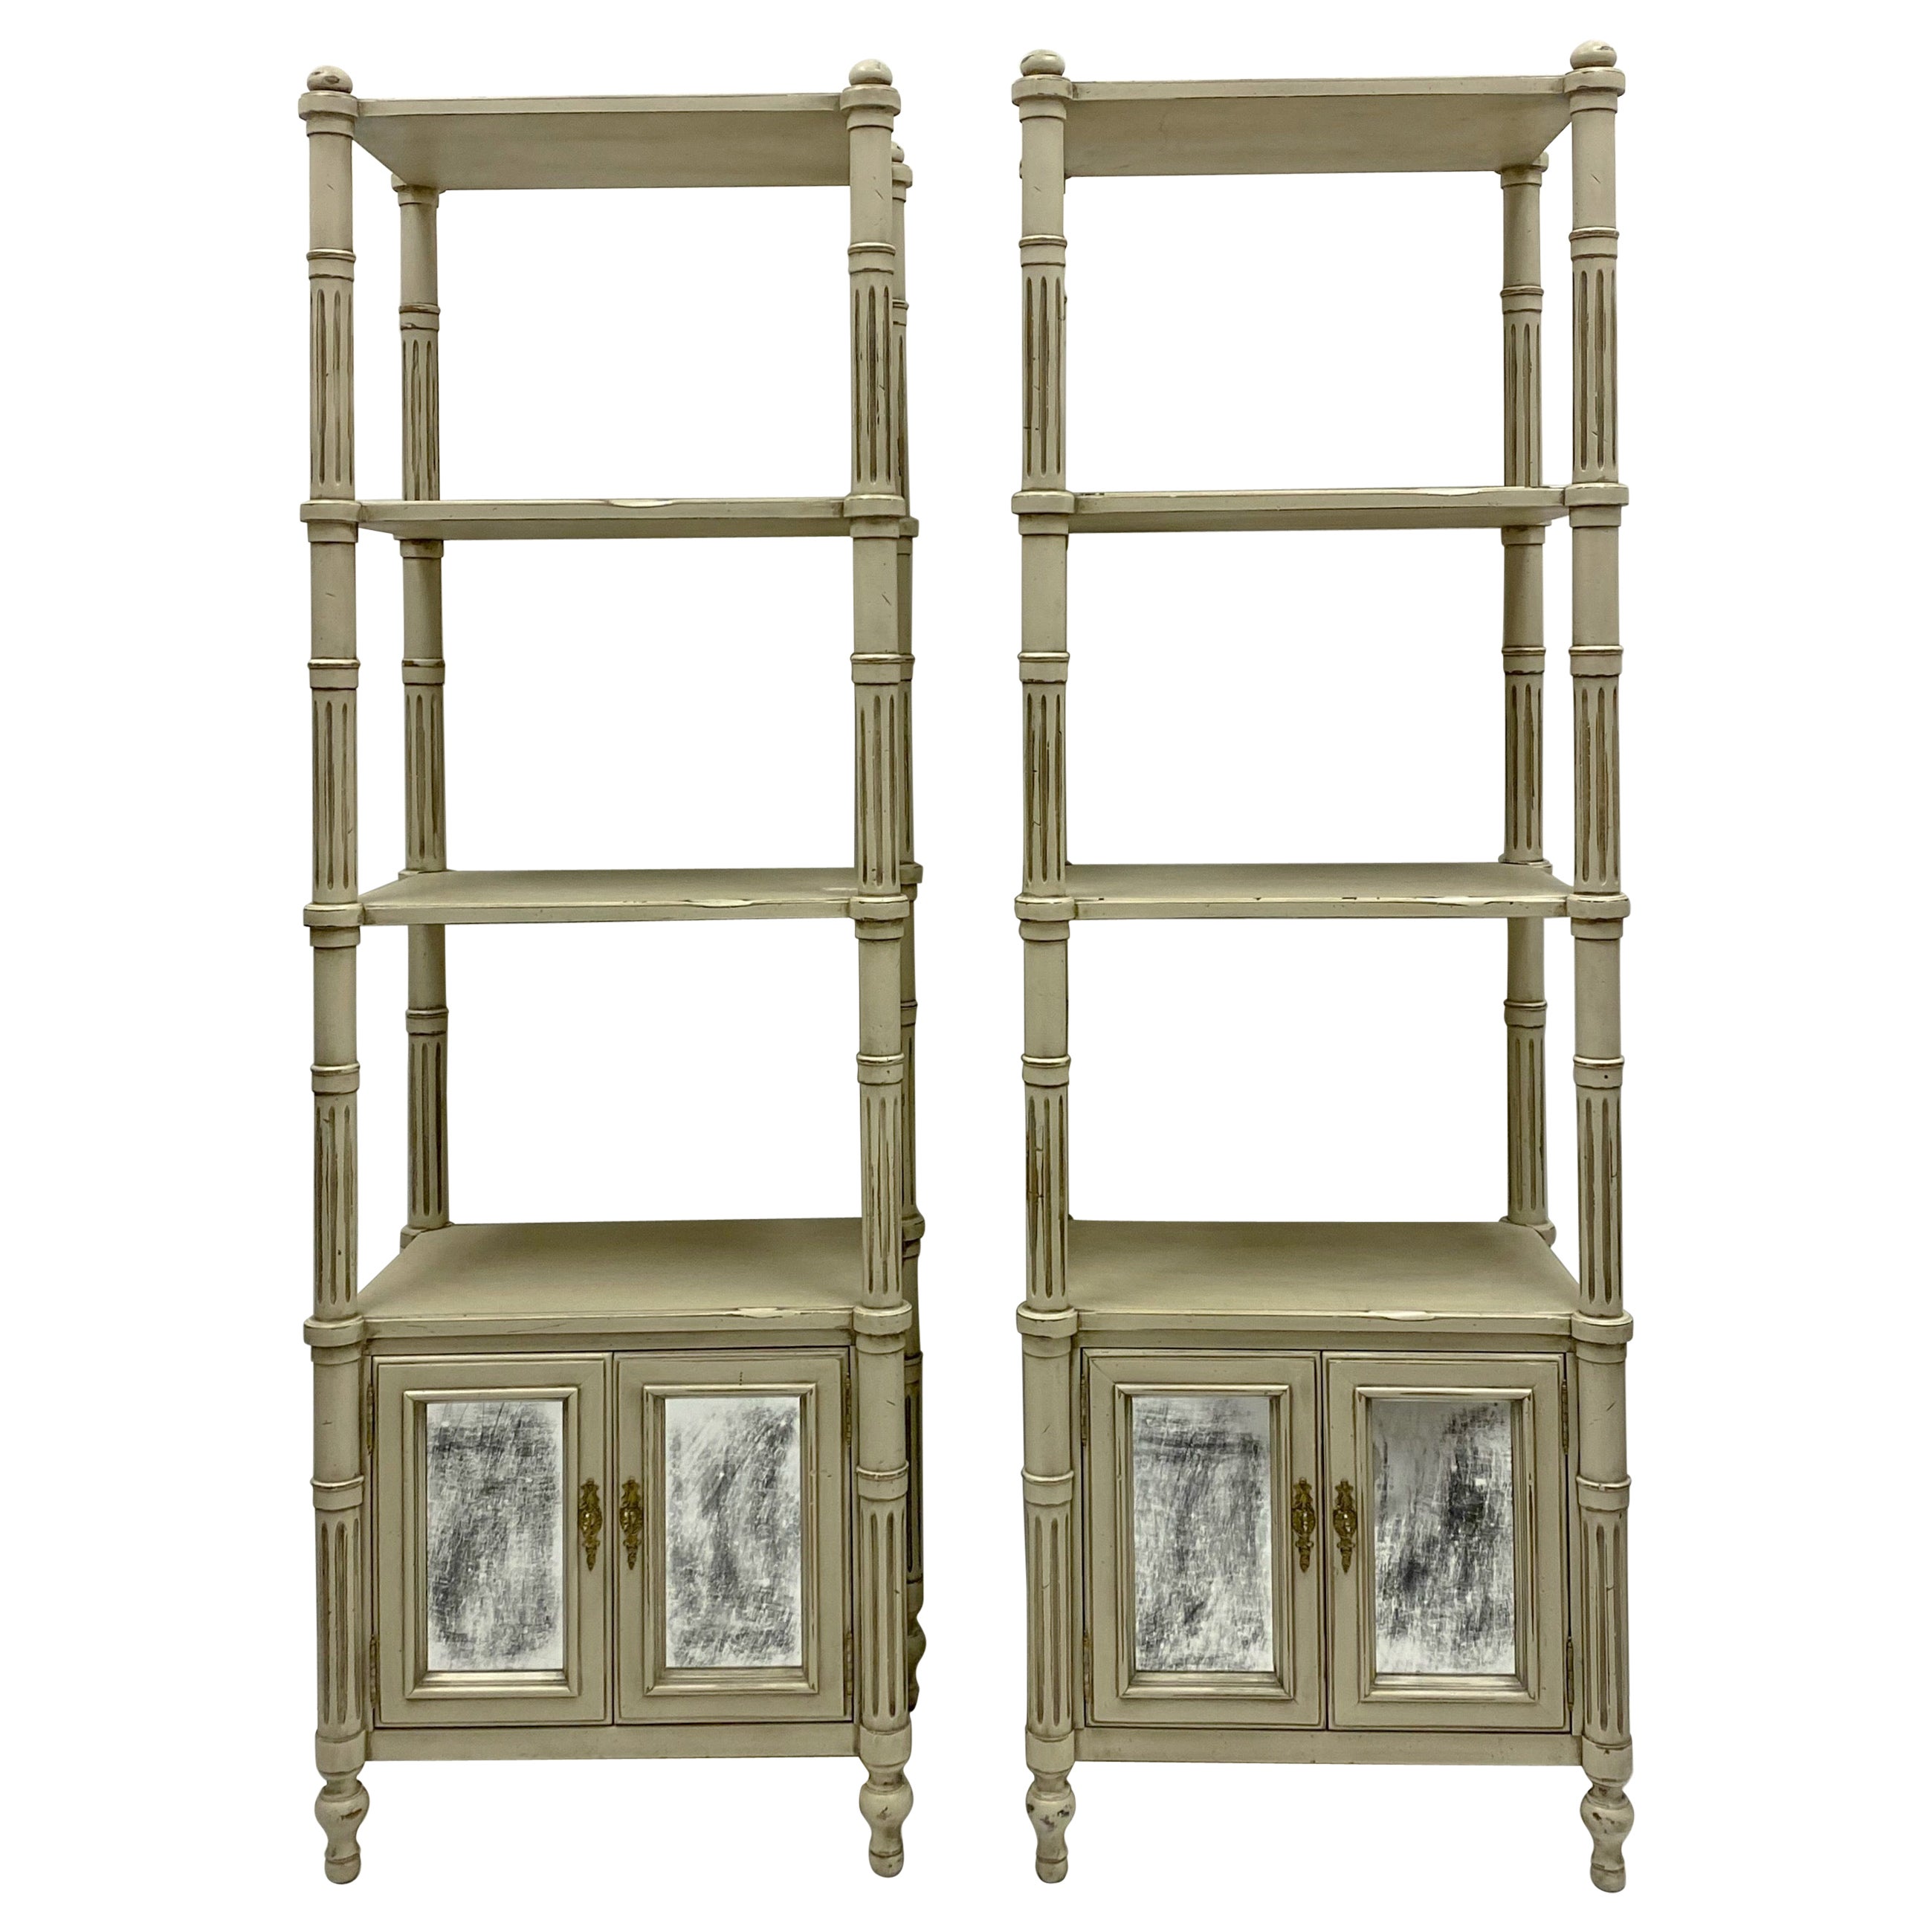 Late 20th-C. Gustavian or Swedish Style Etageres / Bookshelves / Cabinets, Pair